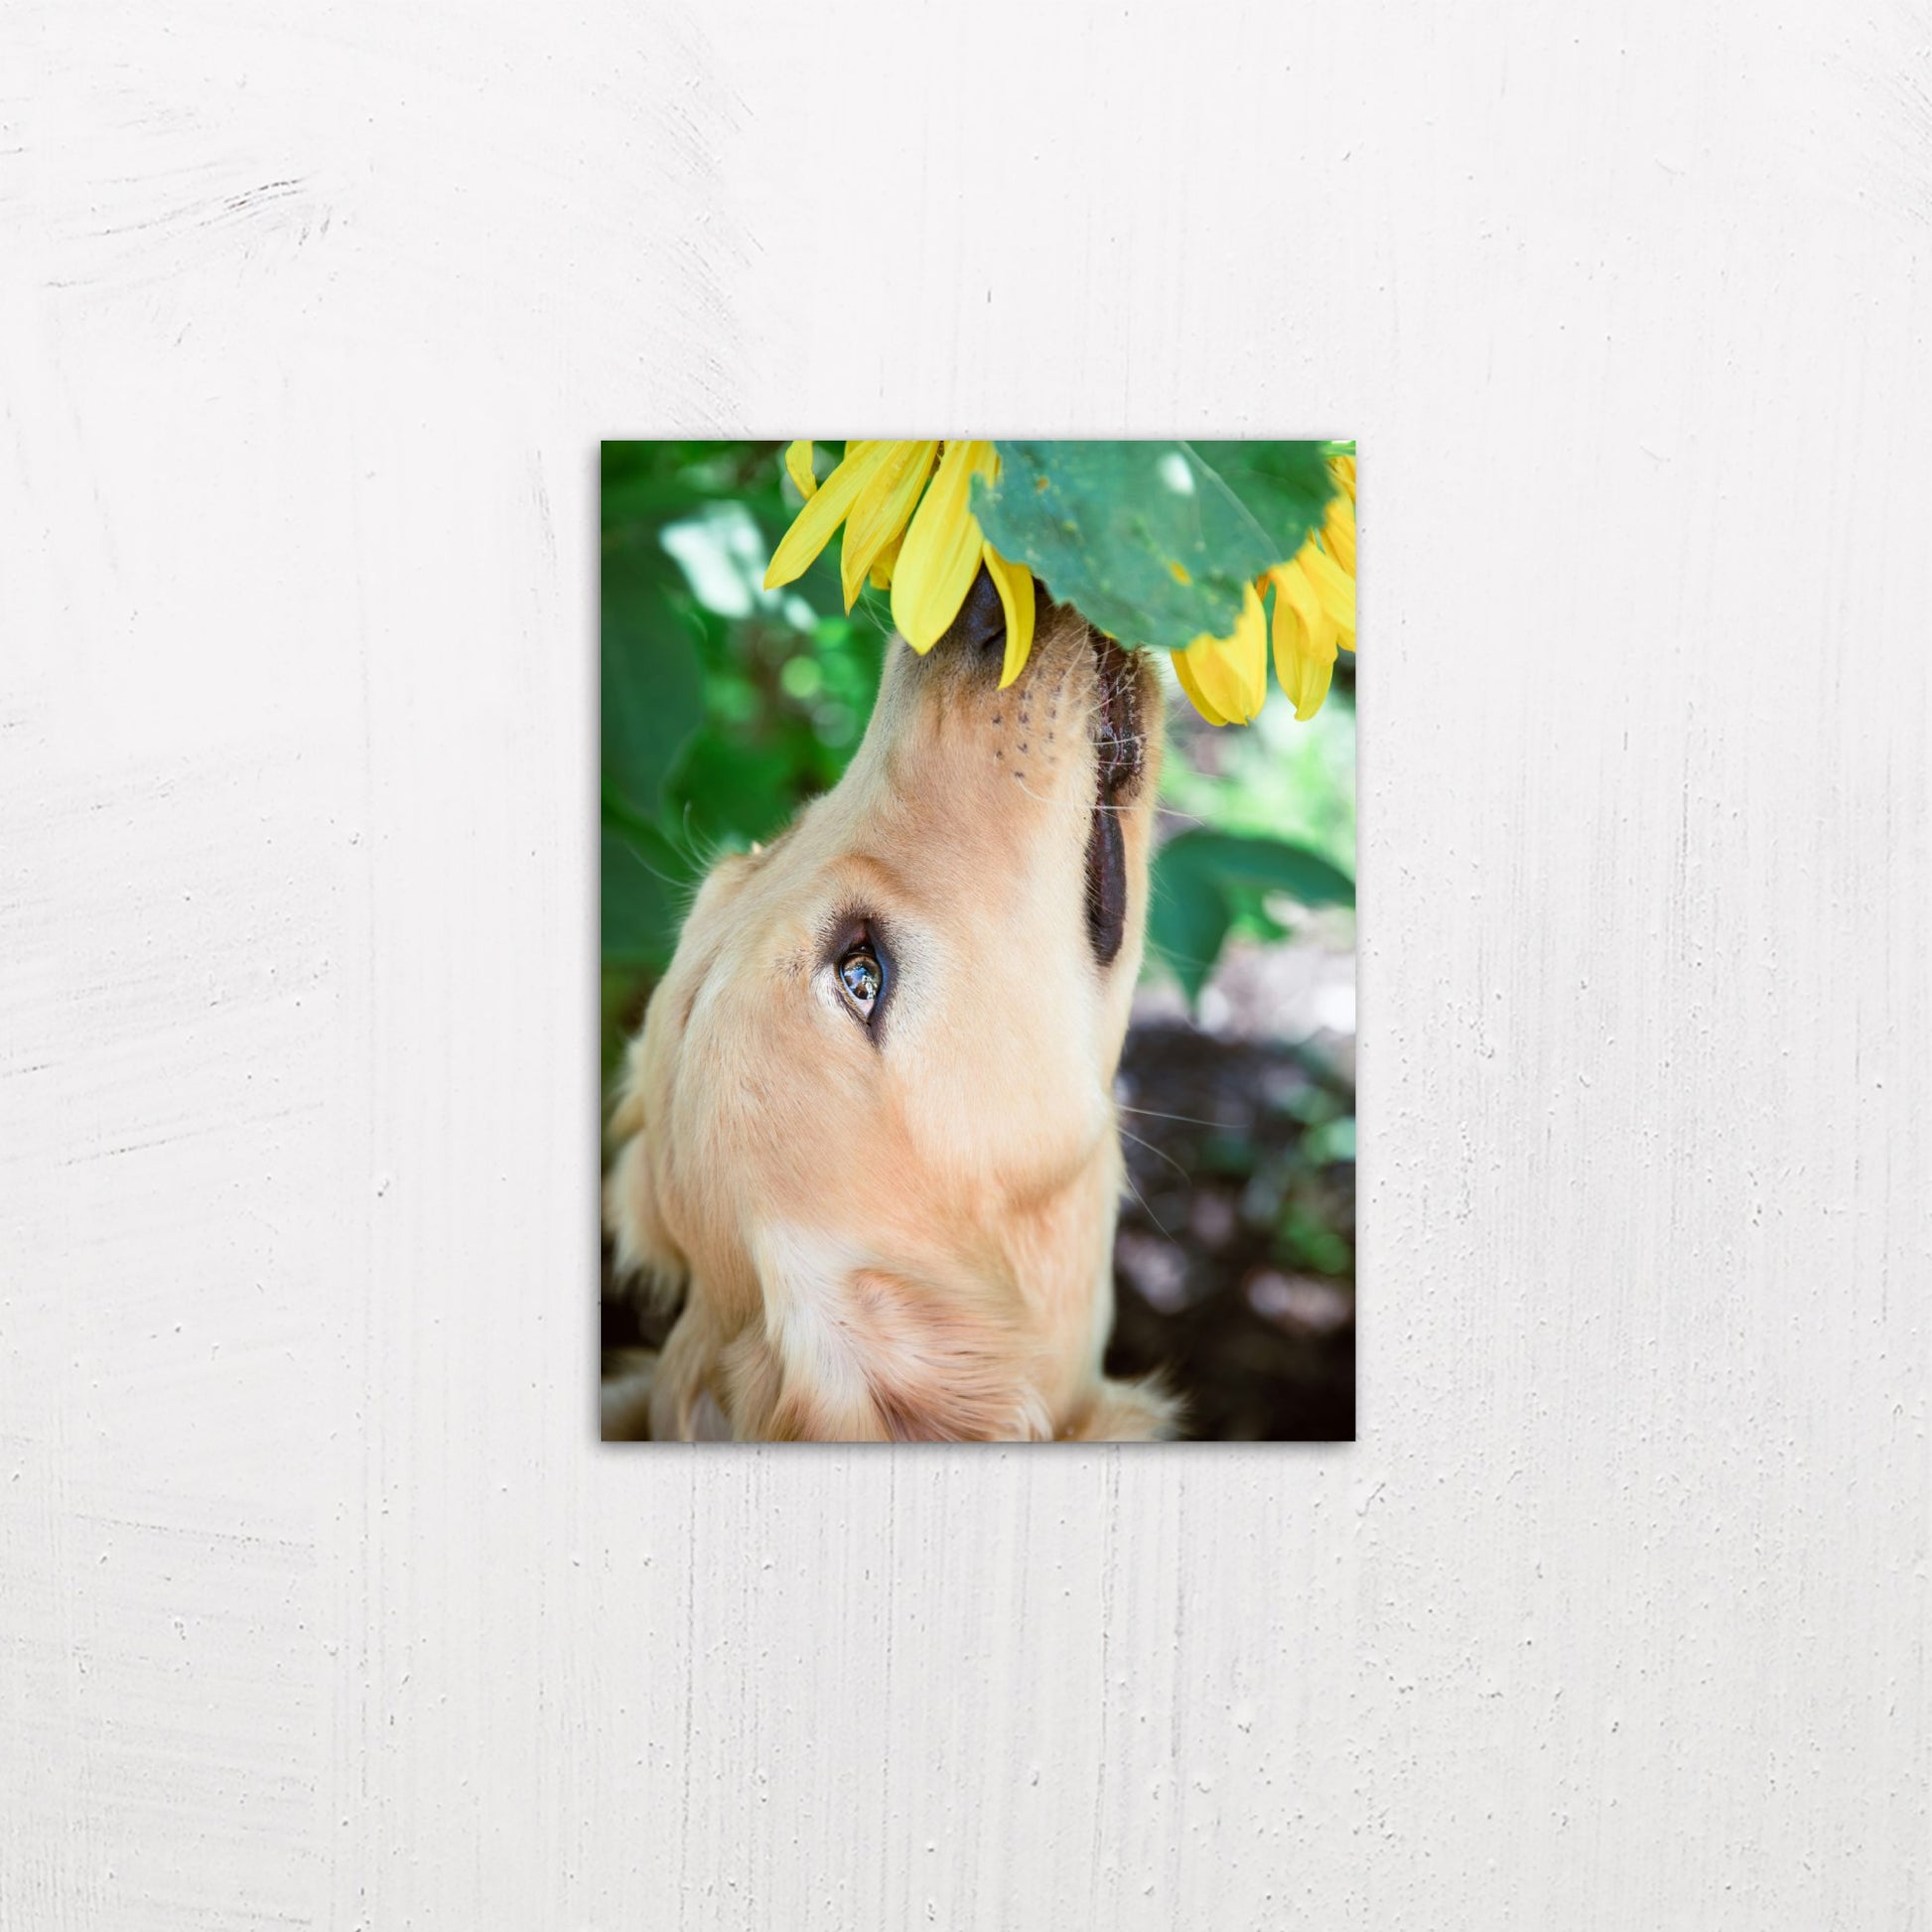 A small size metal art poster display plate with printed design of a Golden Retriever with a Flower